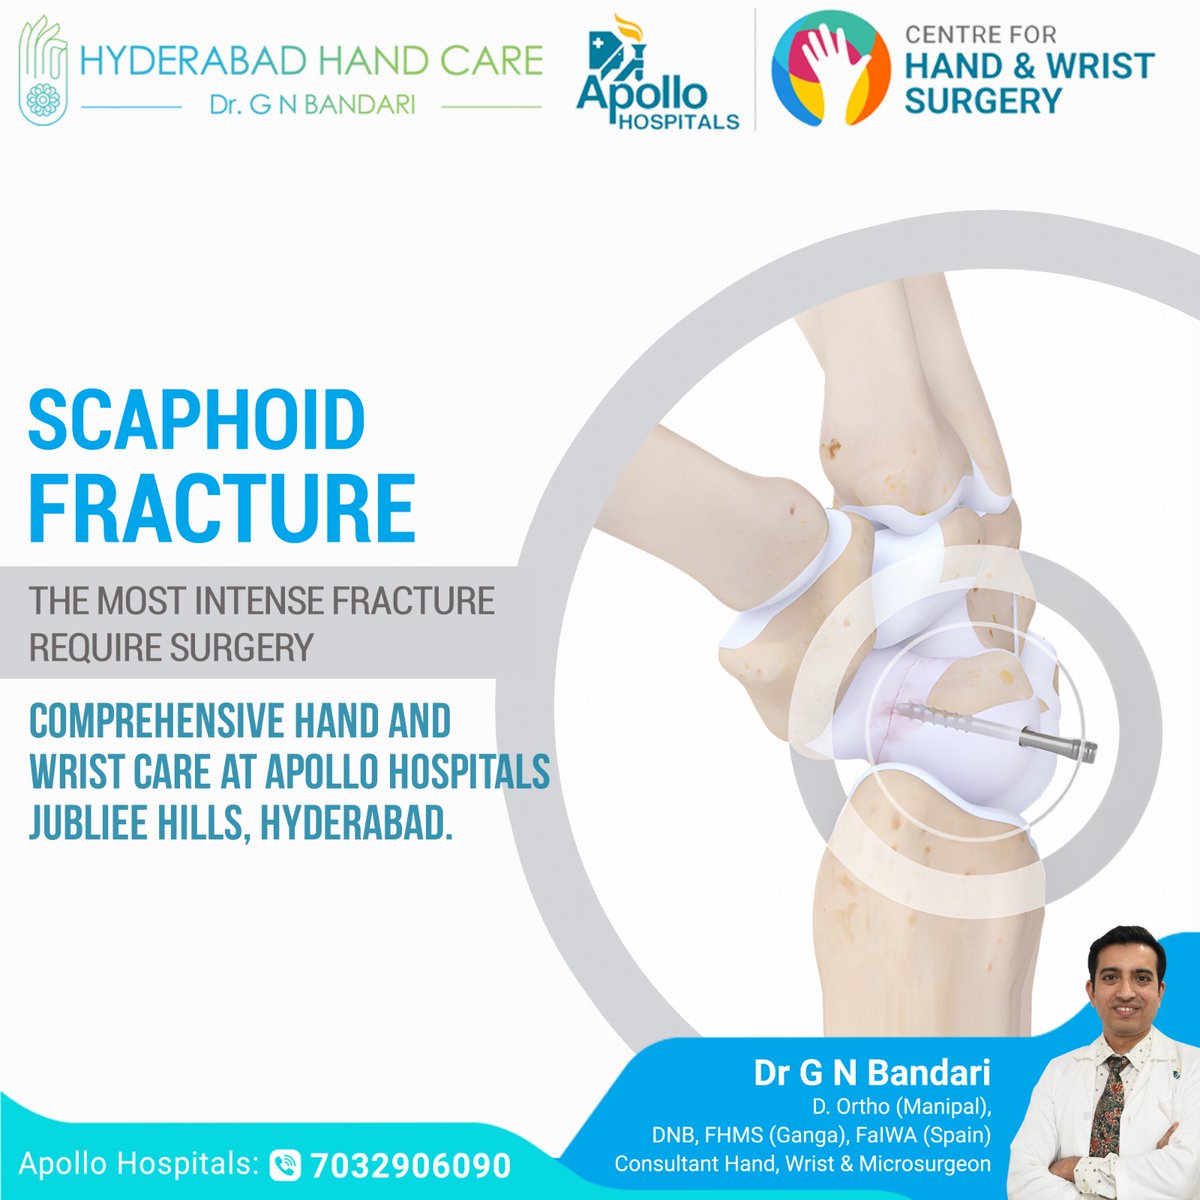 Scaphoid fracture?
#Surgery is key for the most intensive cases. Trust expert care for recovery. Comprehensive Hand and Wrist care at #ApolloHospitals, #JubileeHills, #Hyderabad. Let us help you find relief.

For more visit :  
 hyderabadhandcare.com